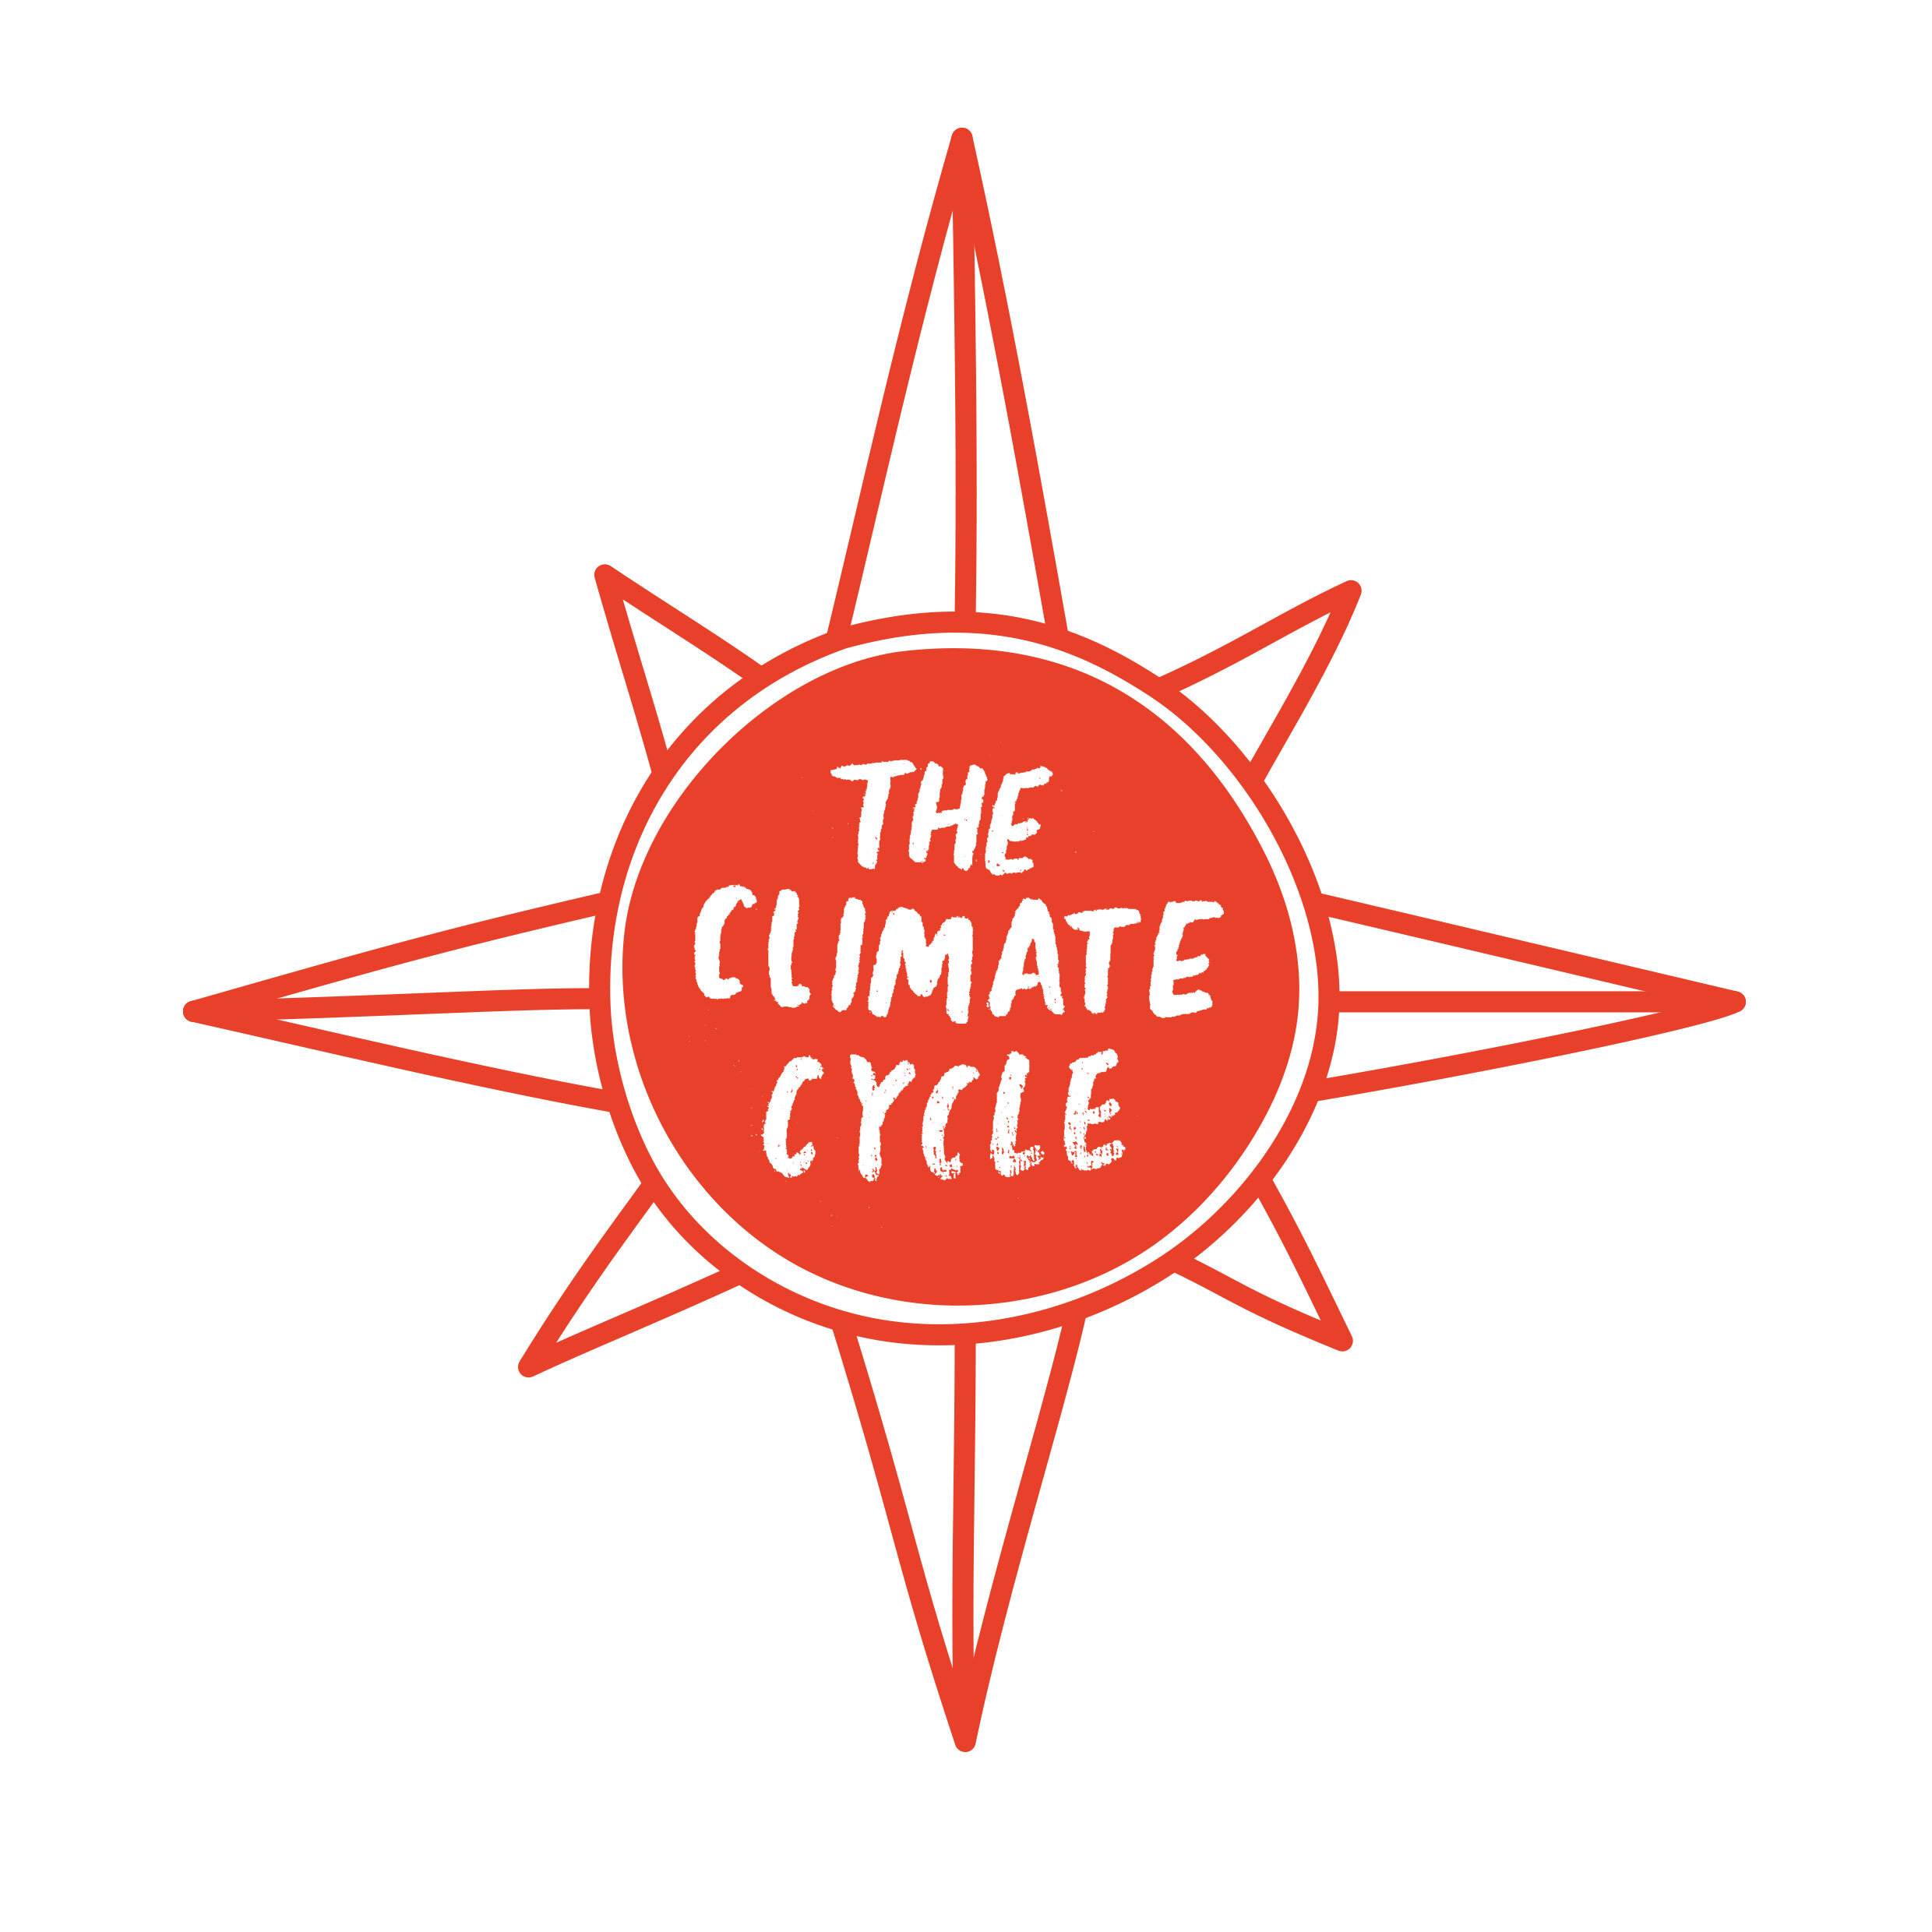 The Climate Cycle